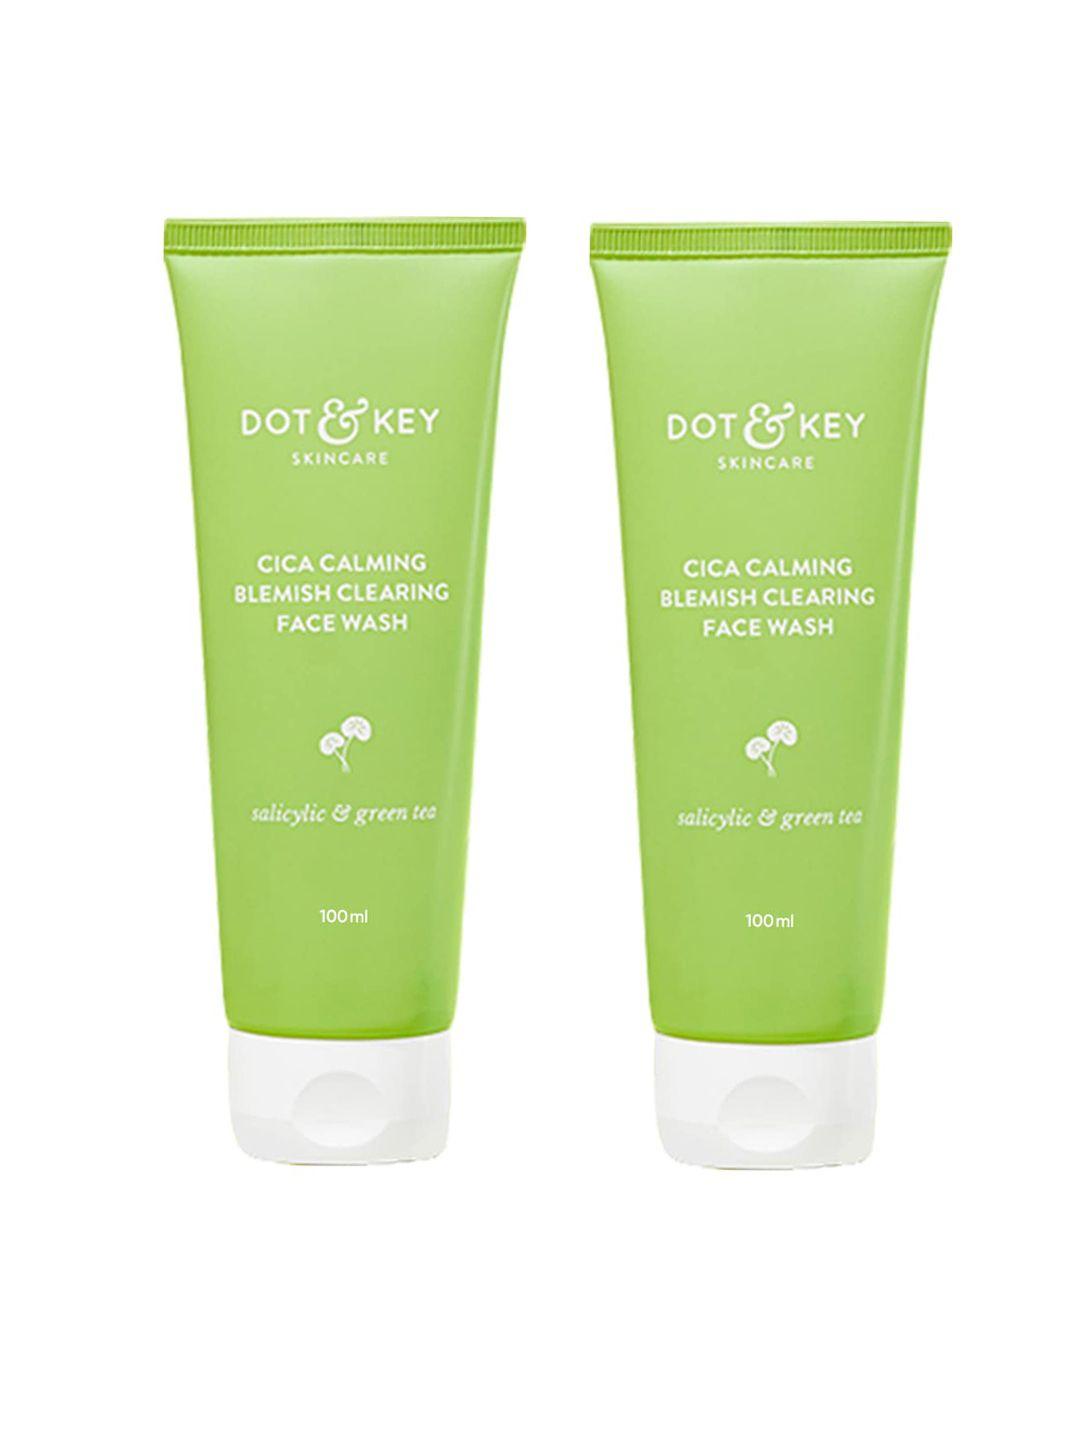 dot & key pack of cica acne free blemish clearing face wash with salicylic acid- 200ml